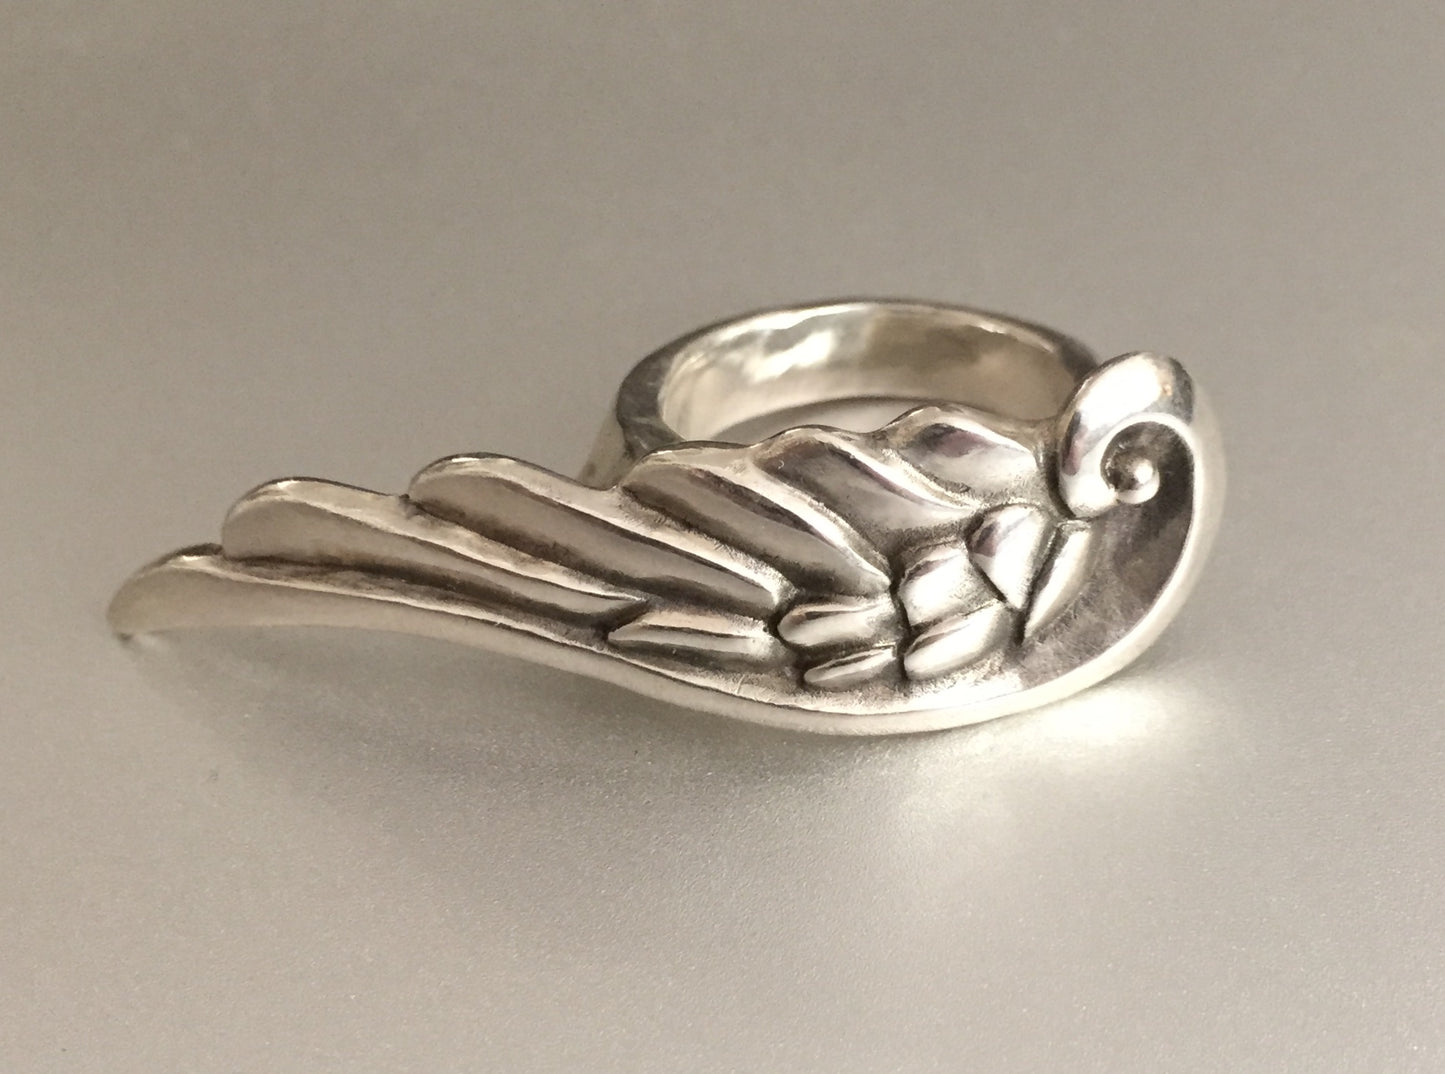 Ring - Silver Silver Ring with Swirl by Roman Paul